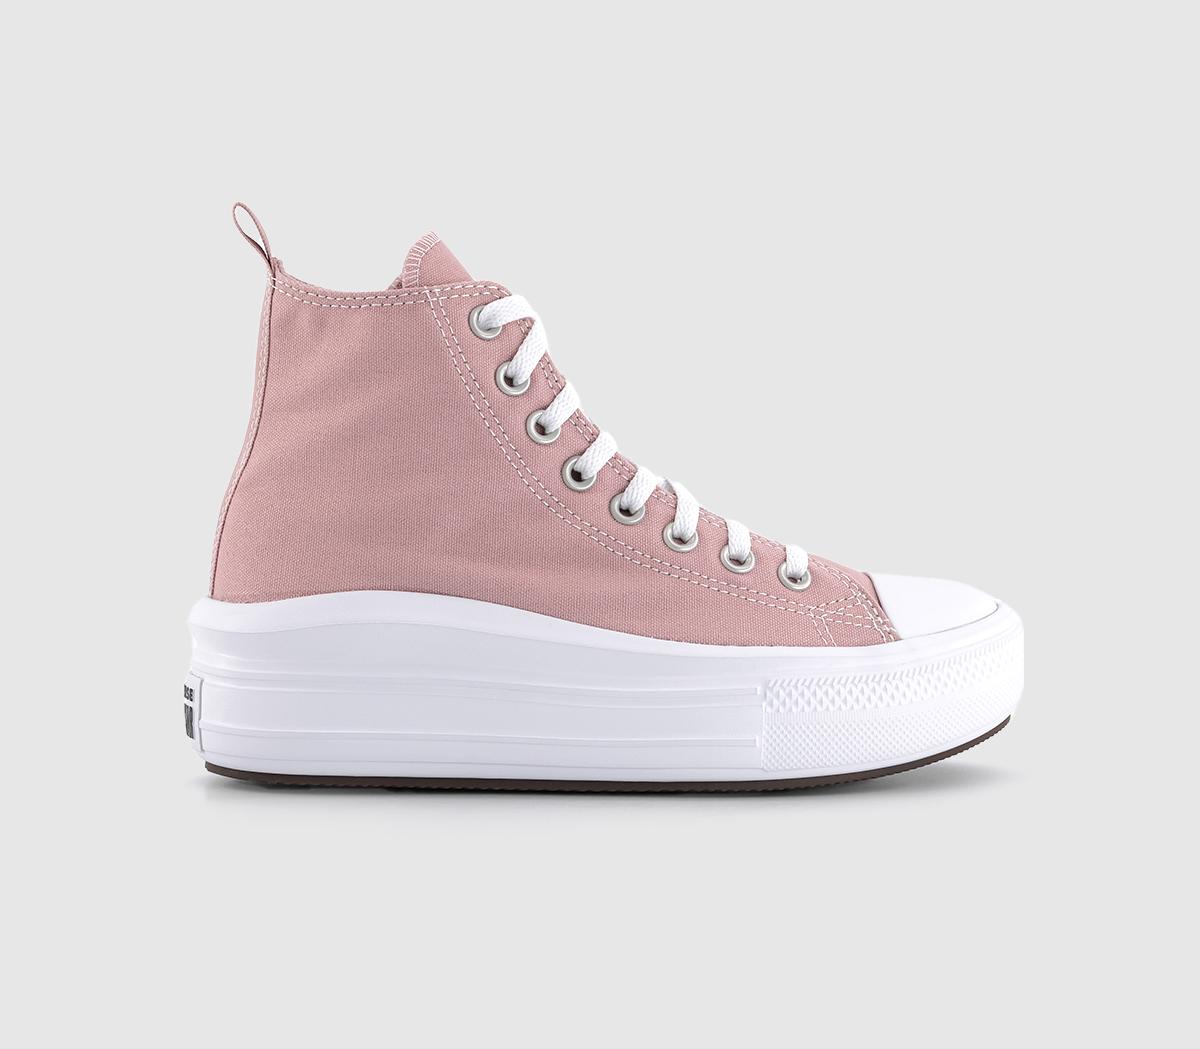 ConverseAll Star Move Jnr TrainersStatic Pink White Black